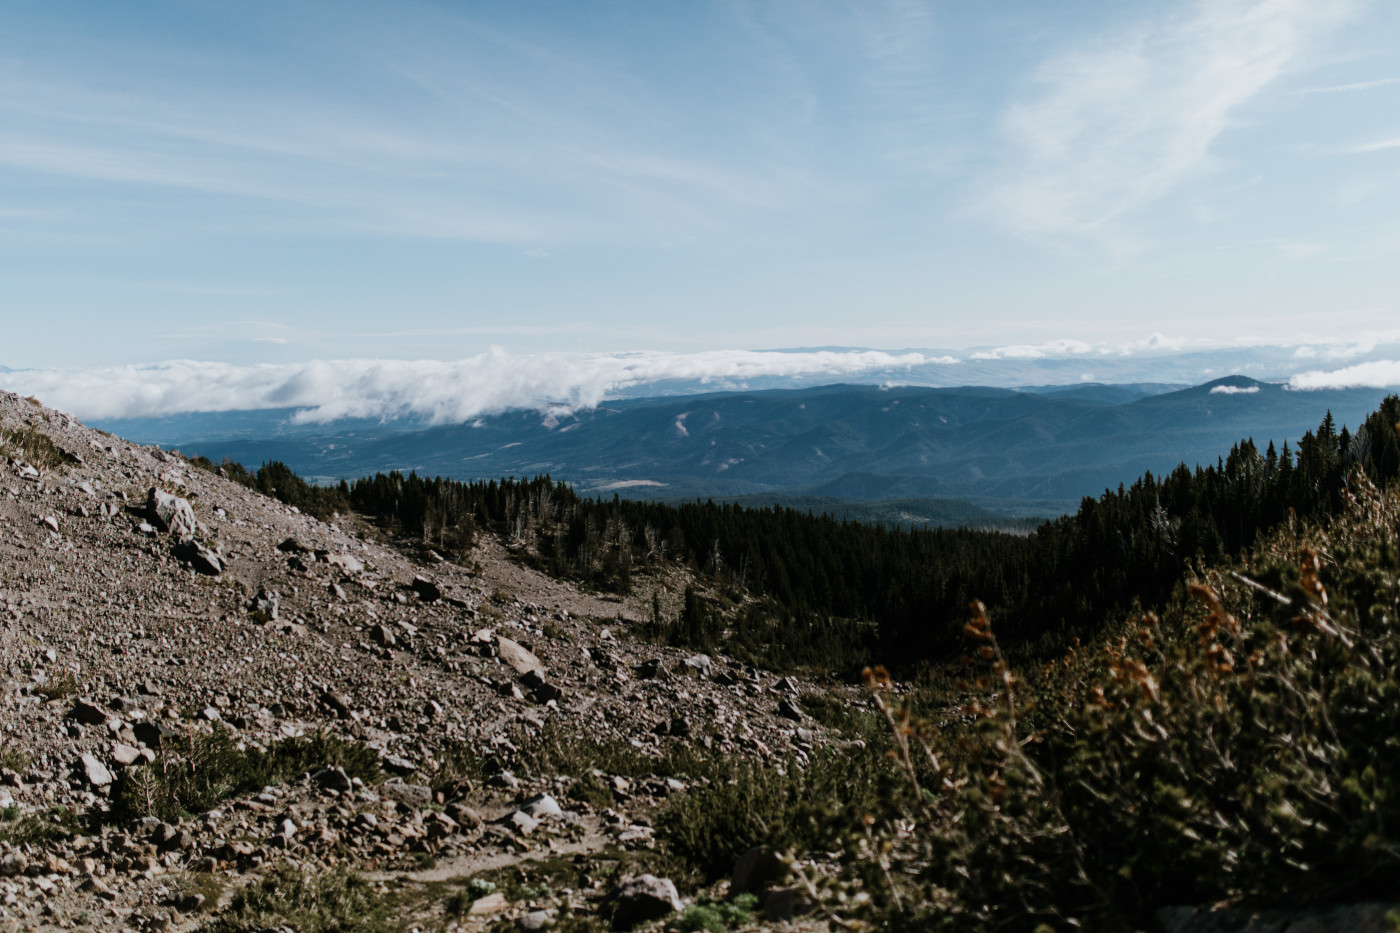 A view of the lanscape on Mount Hood. Elopement photography at Mount Hood by Sienna Plus Josh.